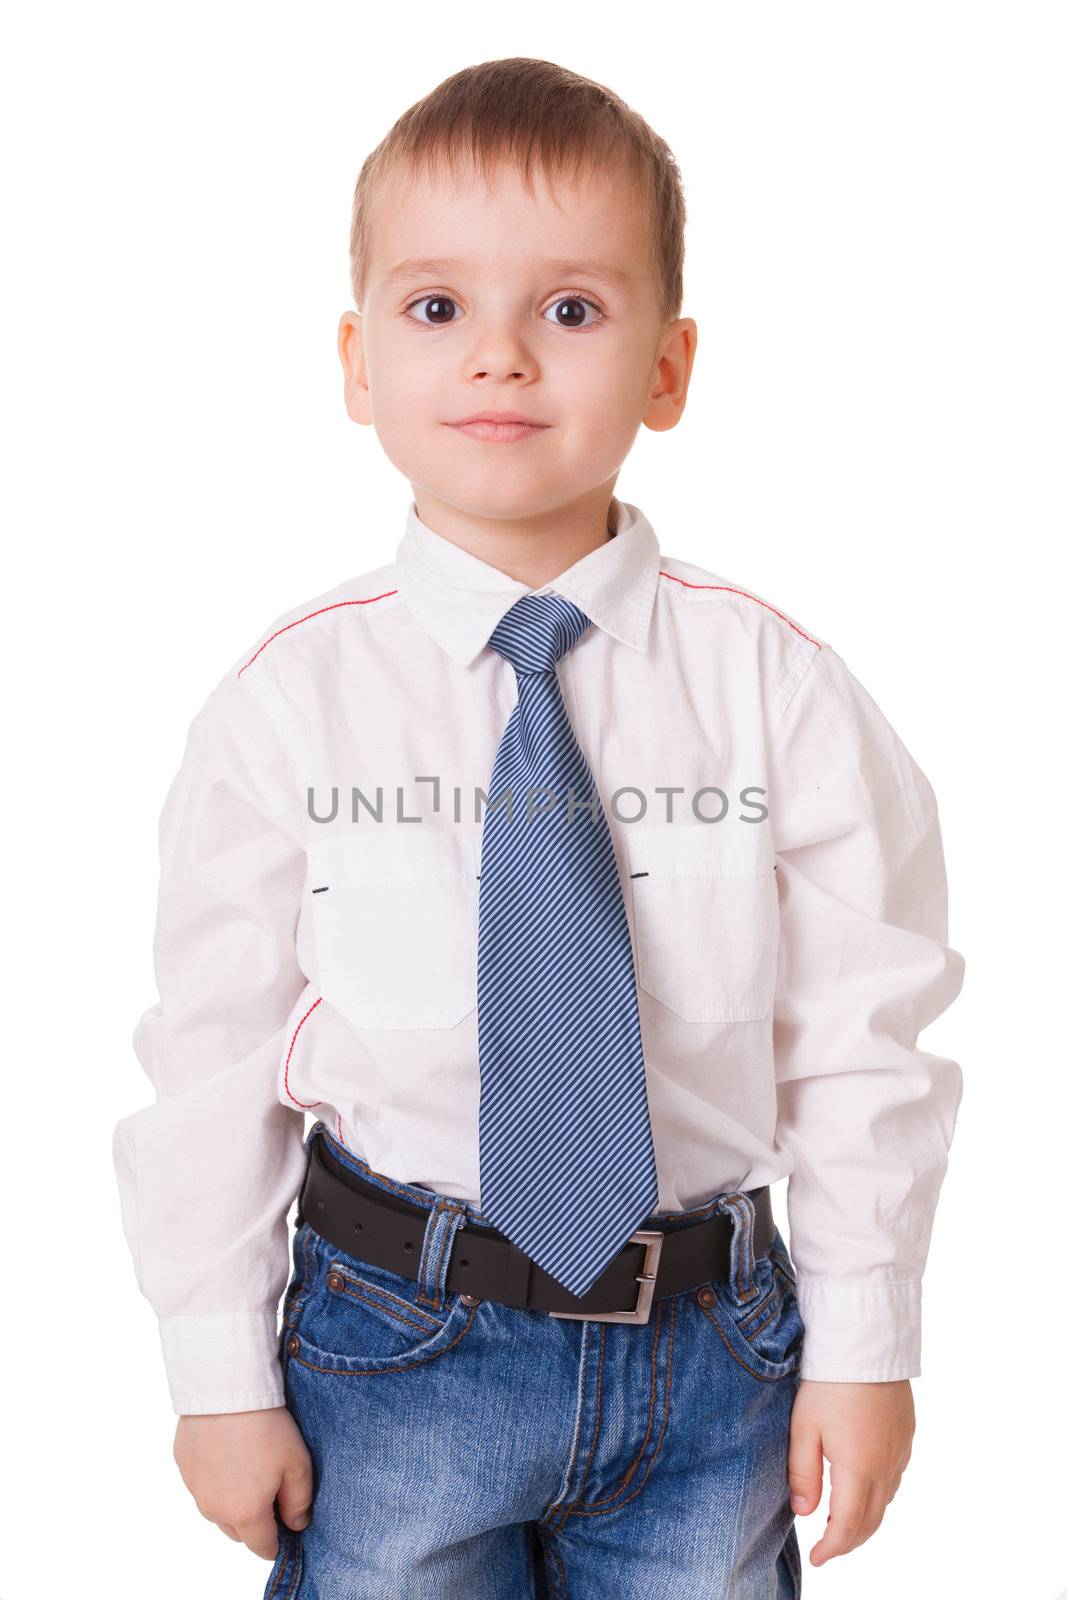 Calm clever preschool kid in shirt and jeans isolated on white background